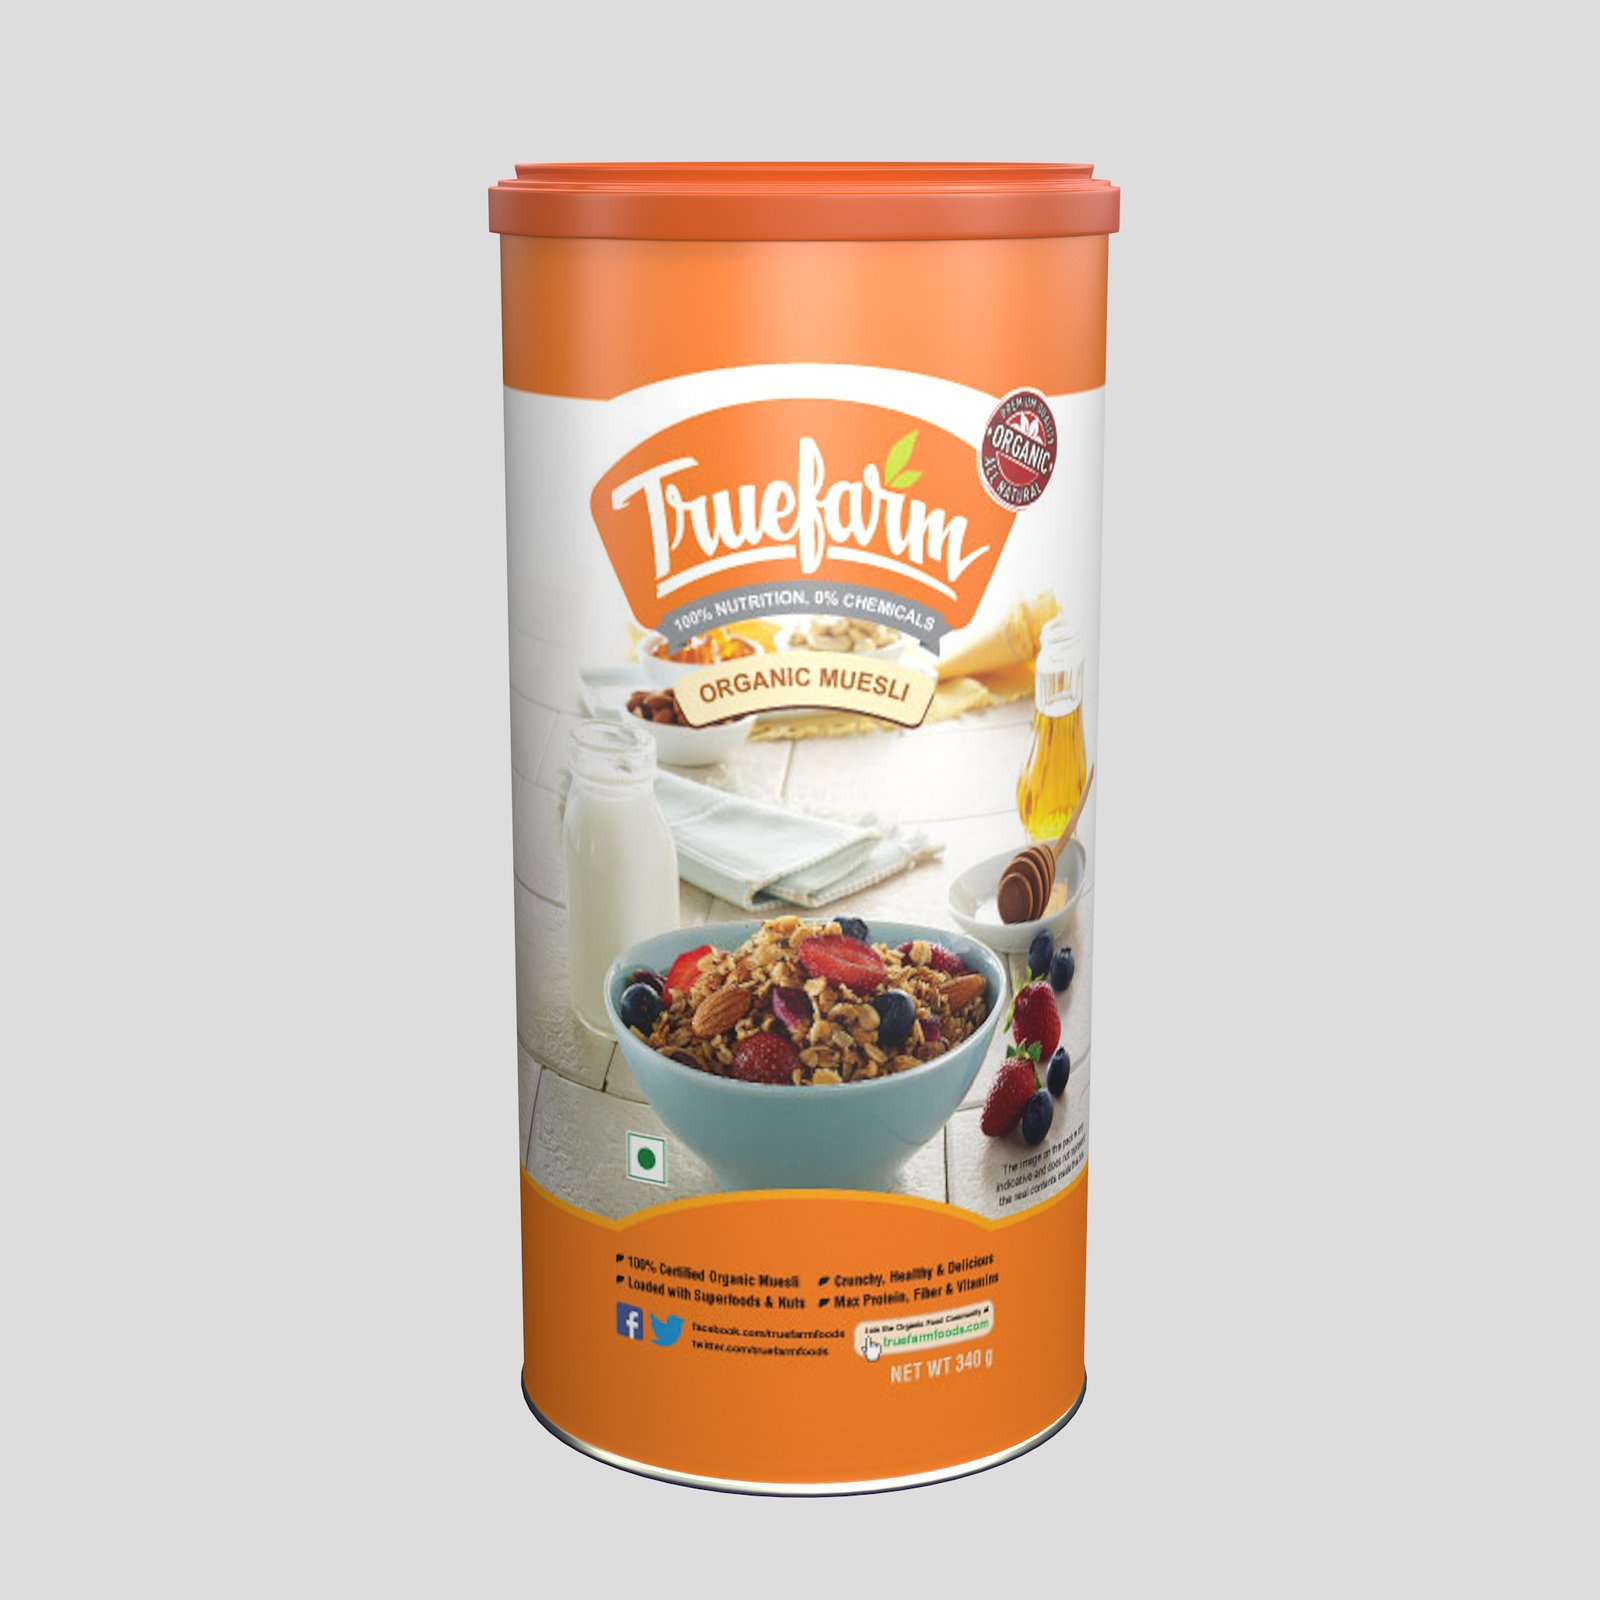 truefarm-foods-launches-products-on-amazon-india